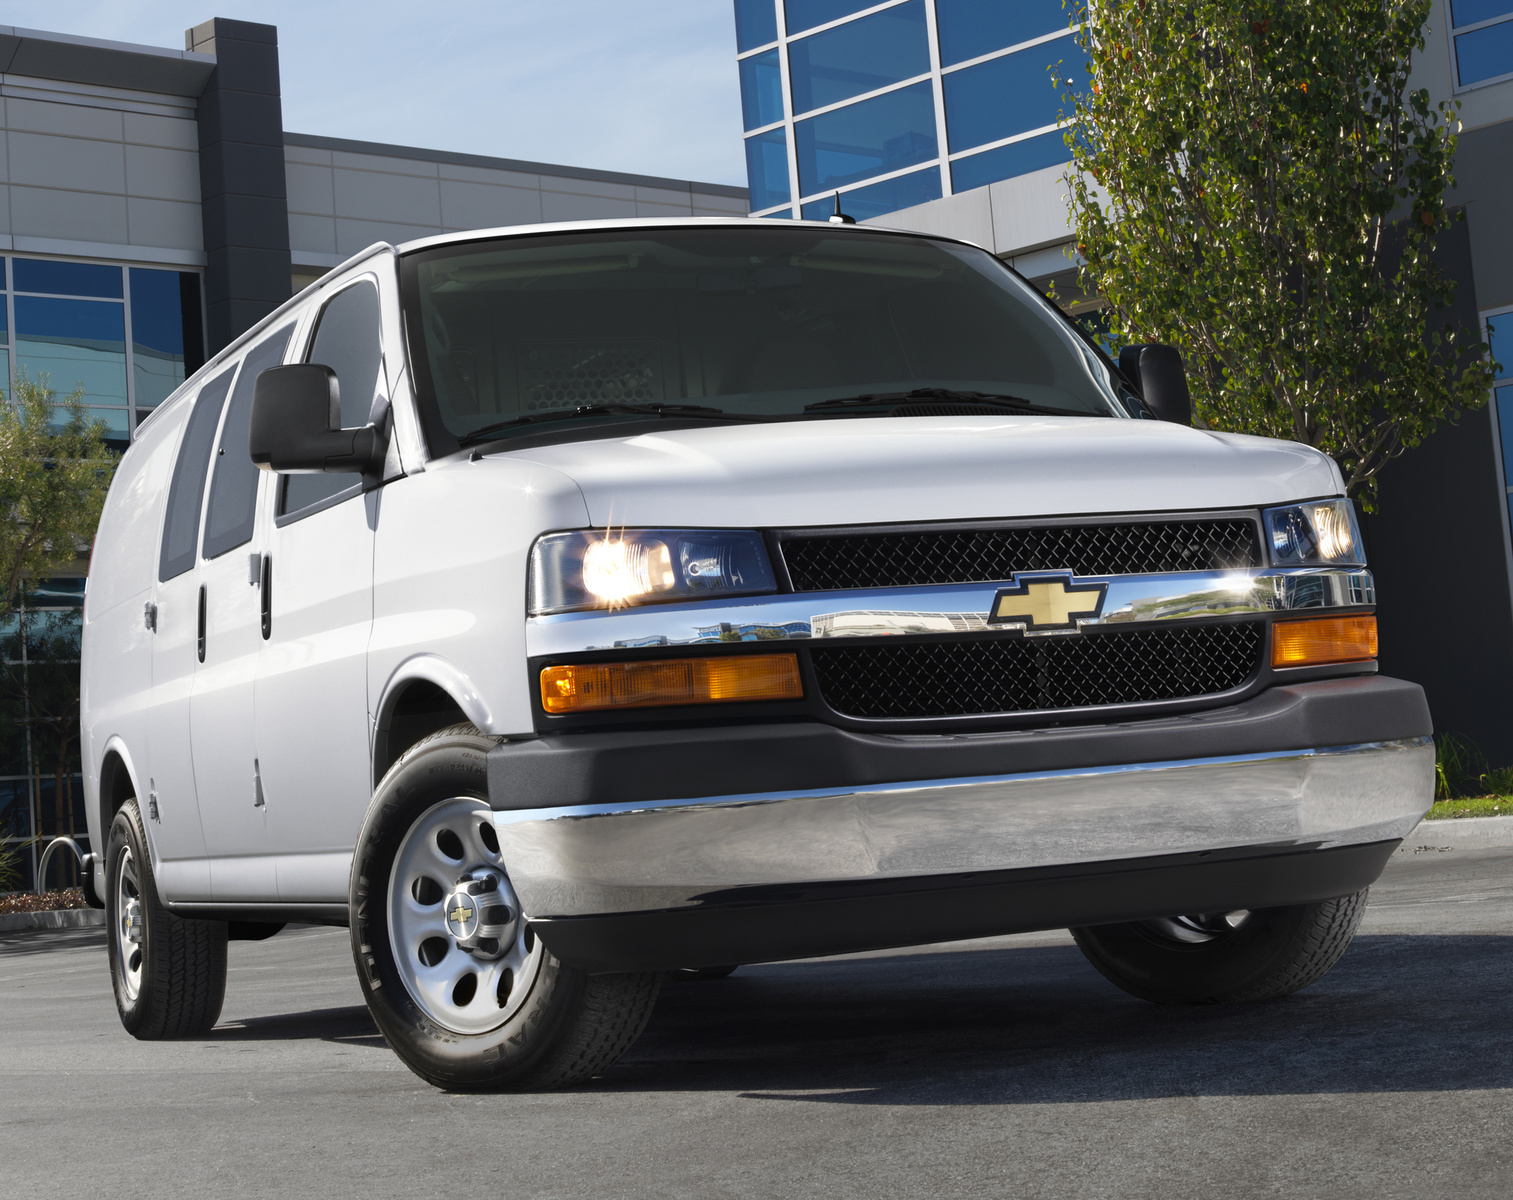 Chevy express vs ford econoline #10